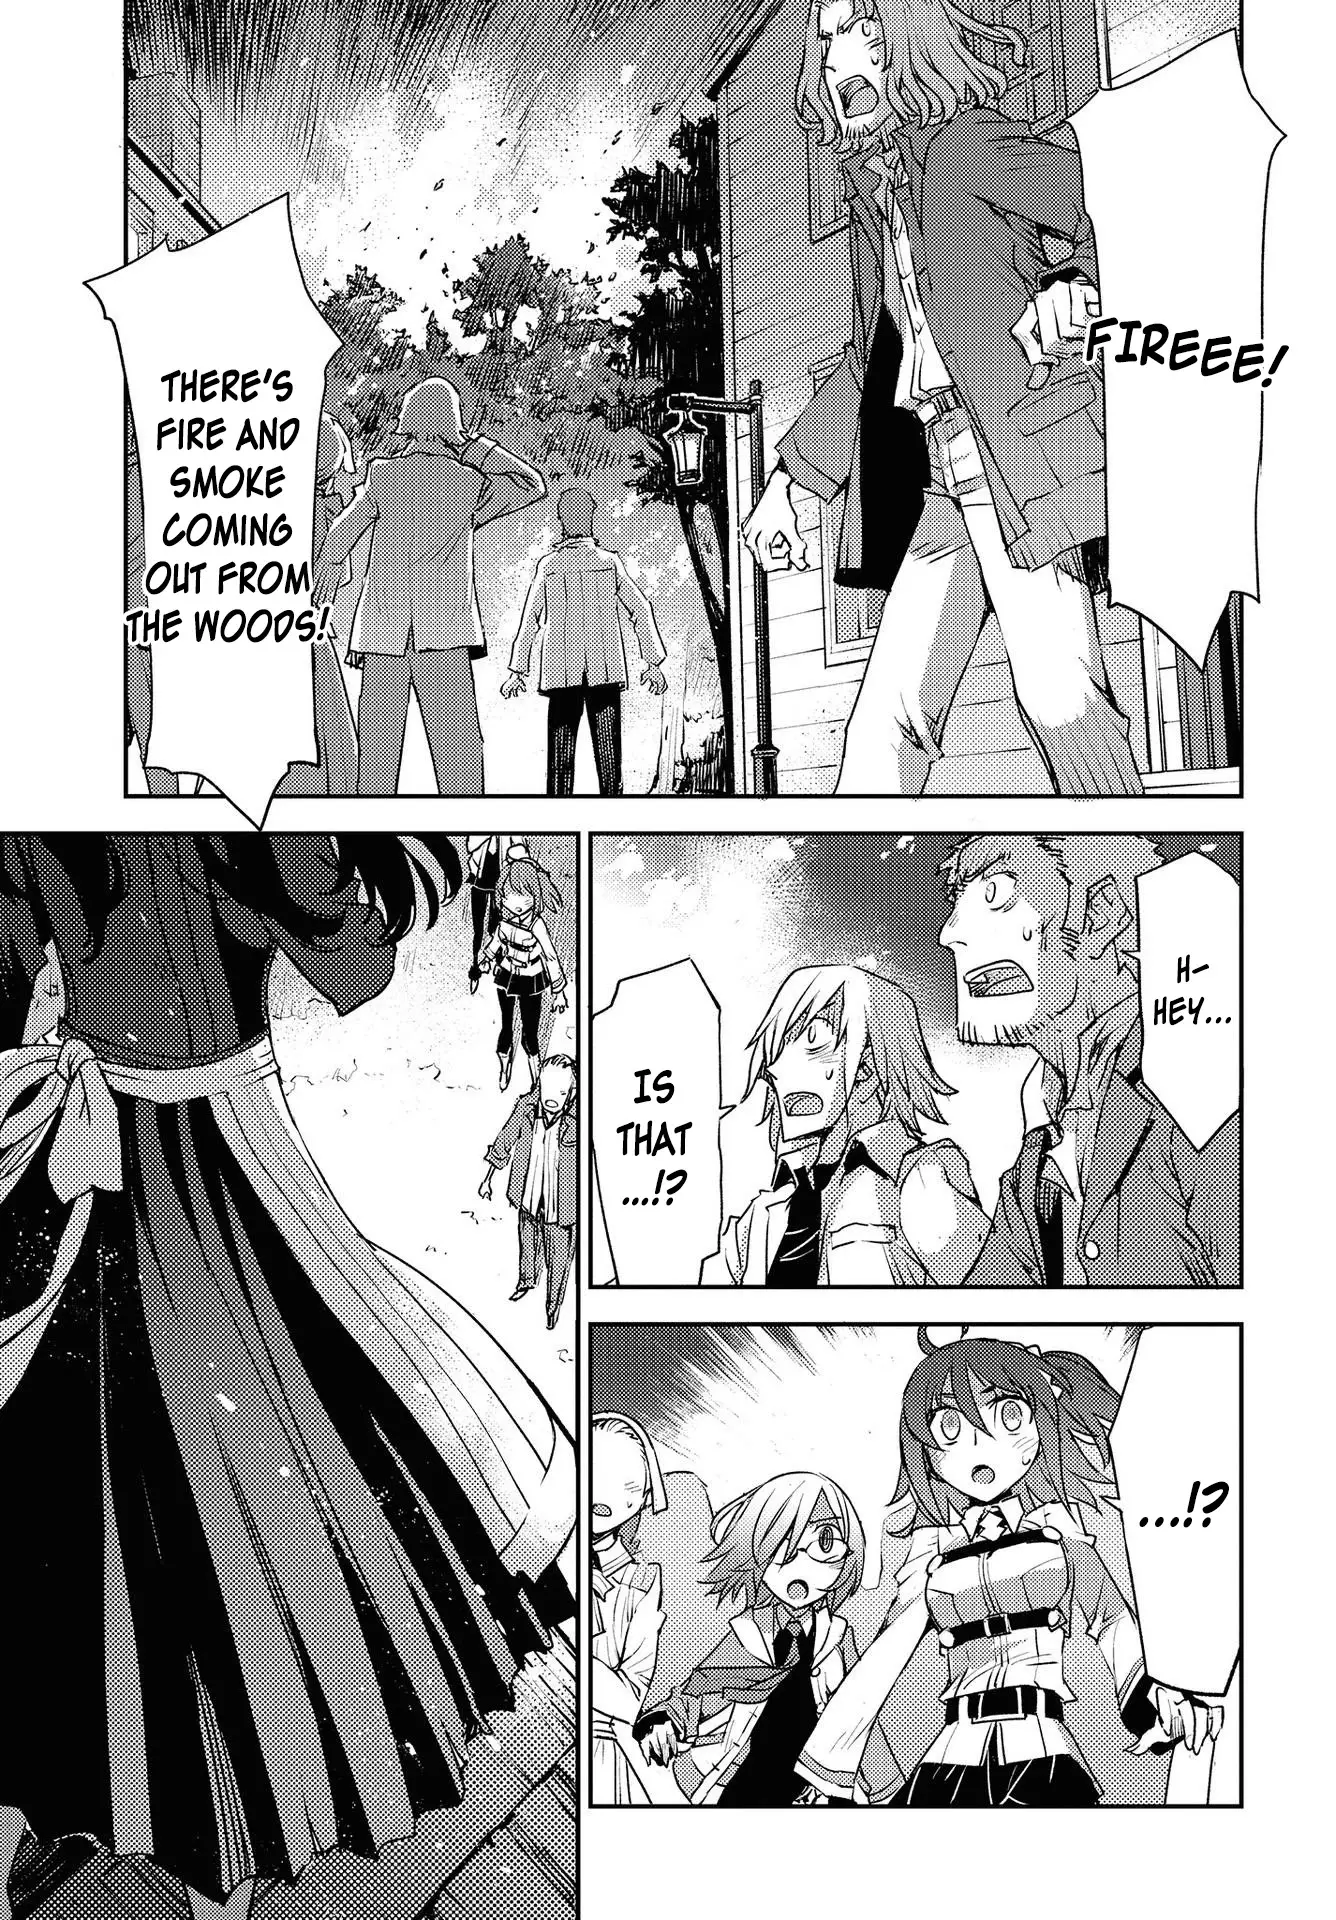 Fate/grand Order: Epic Of Remnant - Subspecies Singularity Iv: Taboo Advent Salem: Salem Of Heresy - 8 page 19